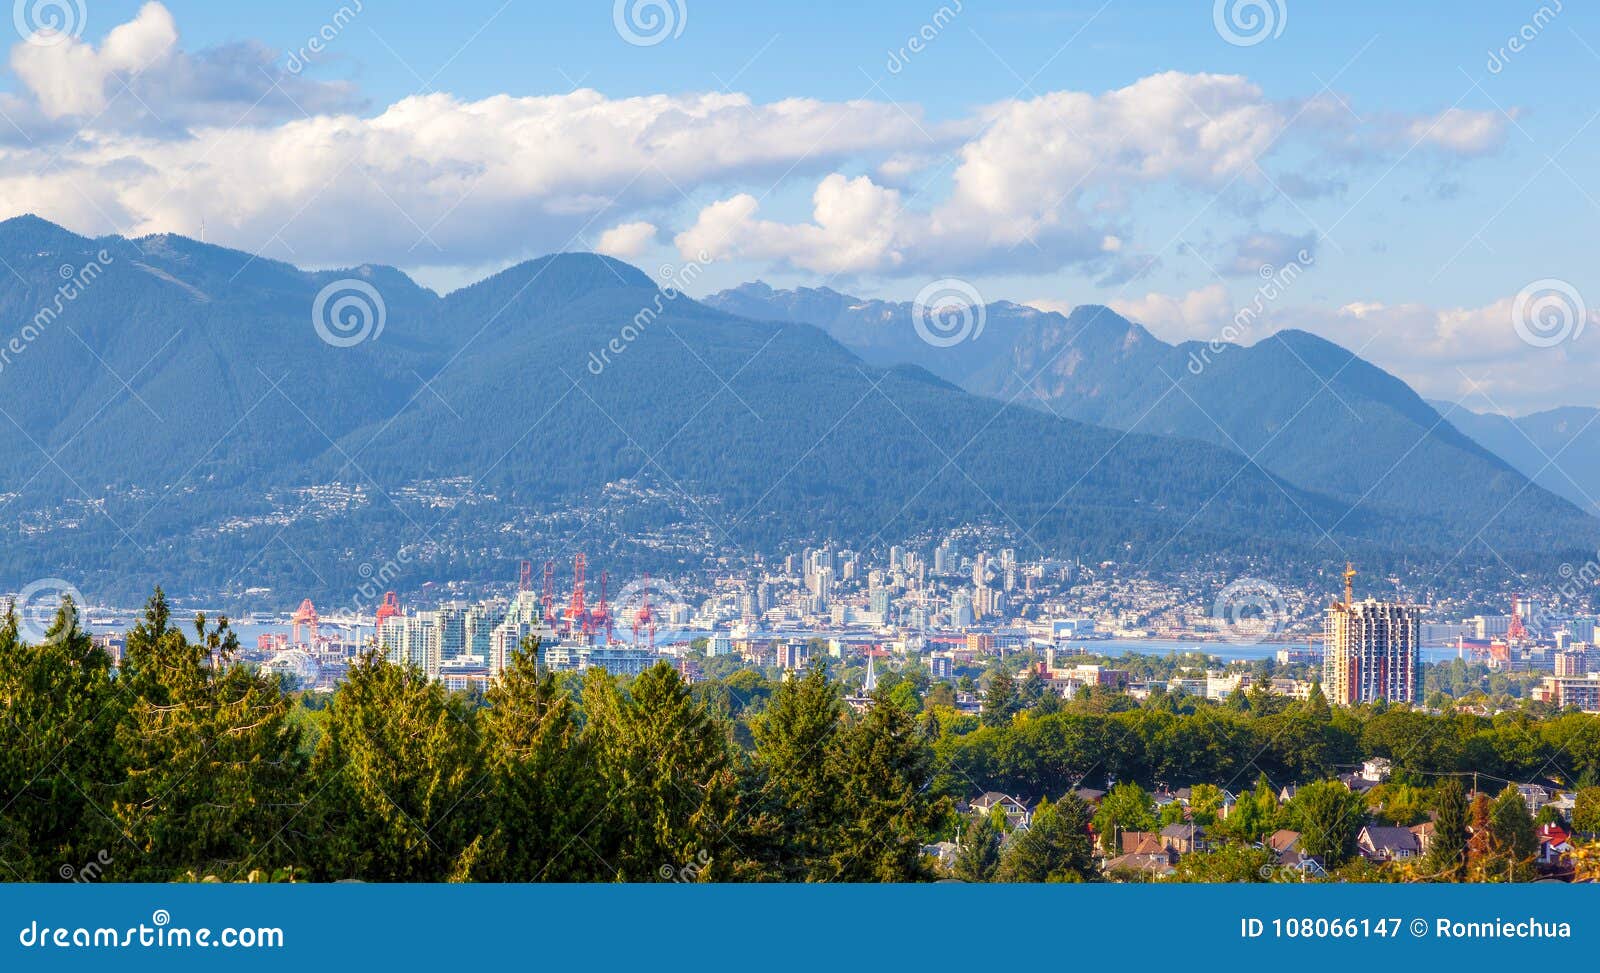 Vancouver City and North Shore Mountains Stock Image - Image of ...